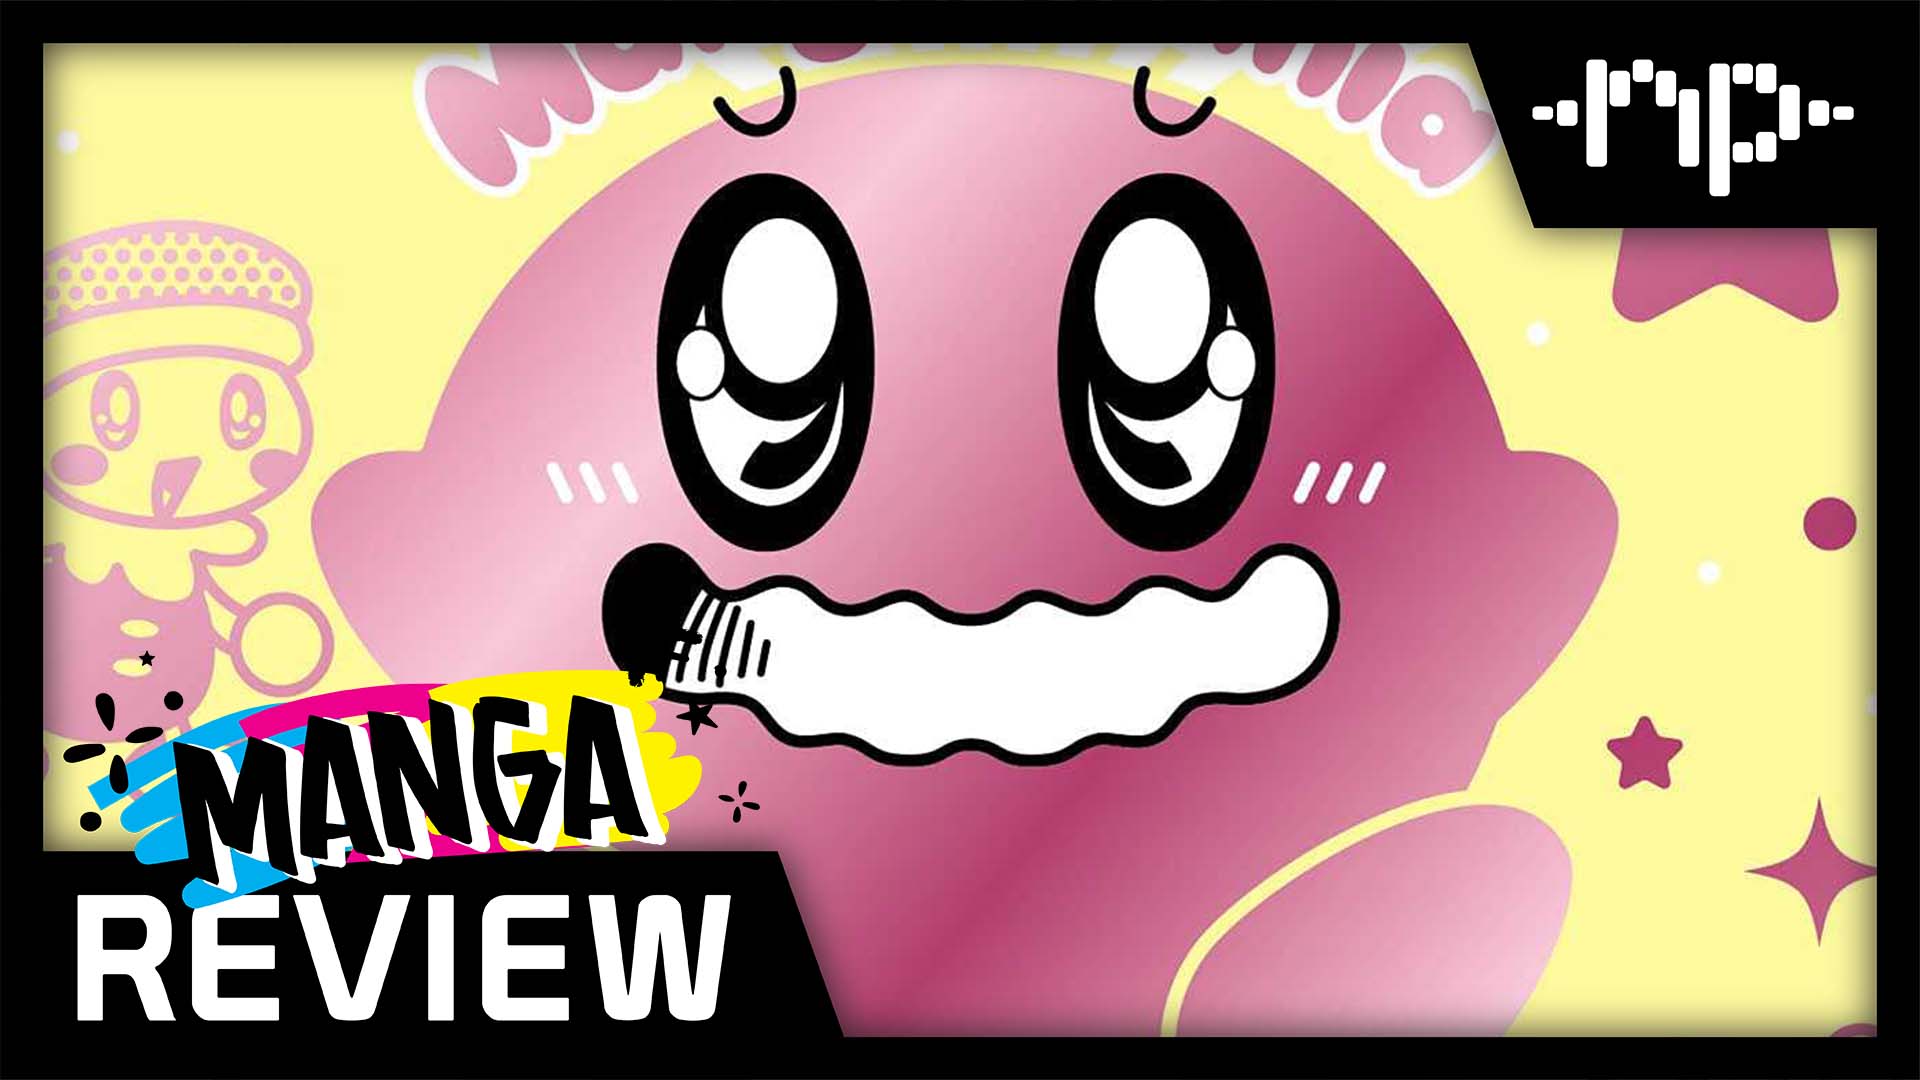 Kirby Manga Mania Vol. 3 Review – A Superficial Copy World of Gags